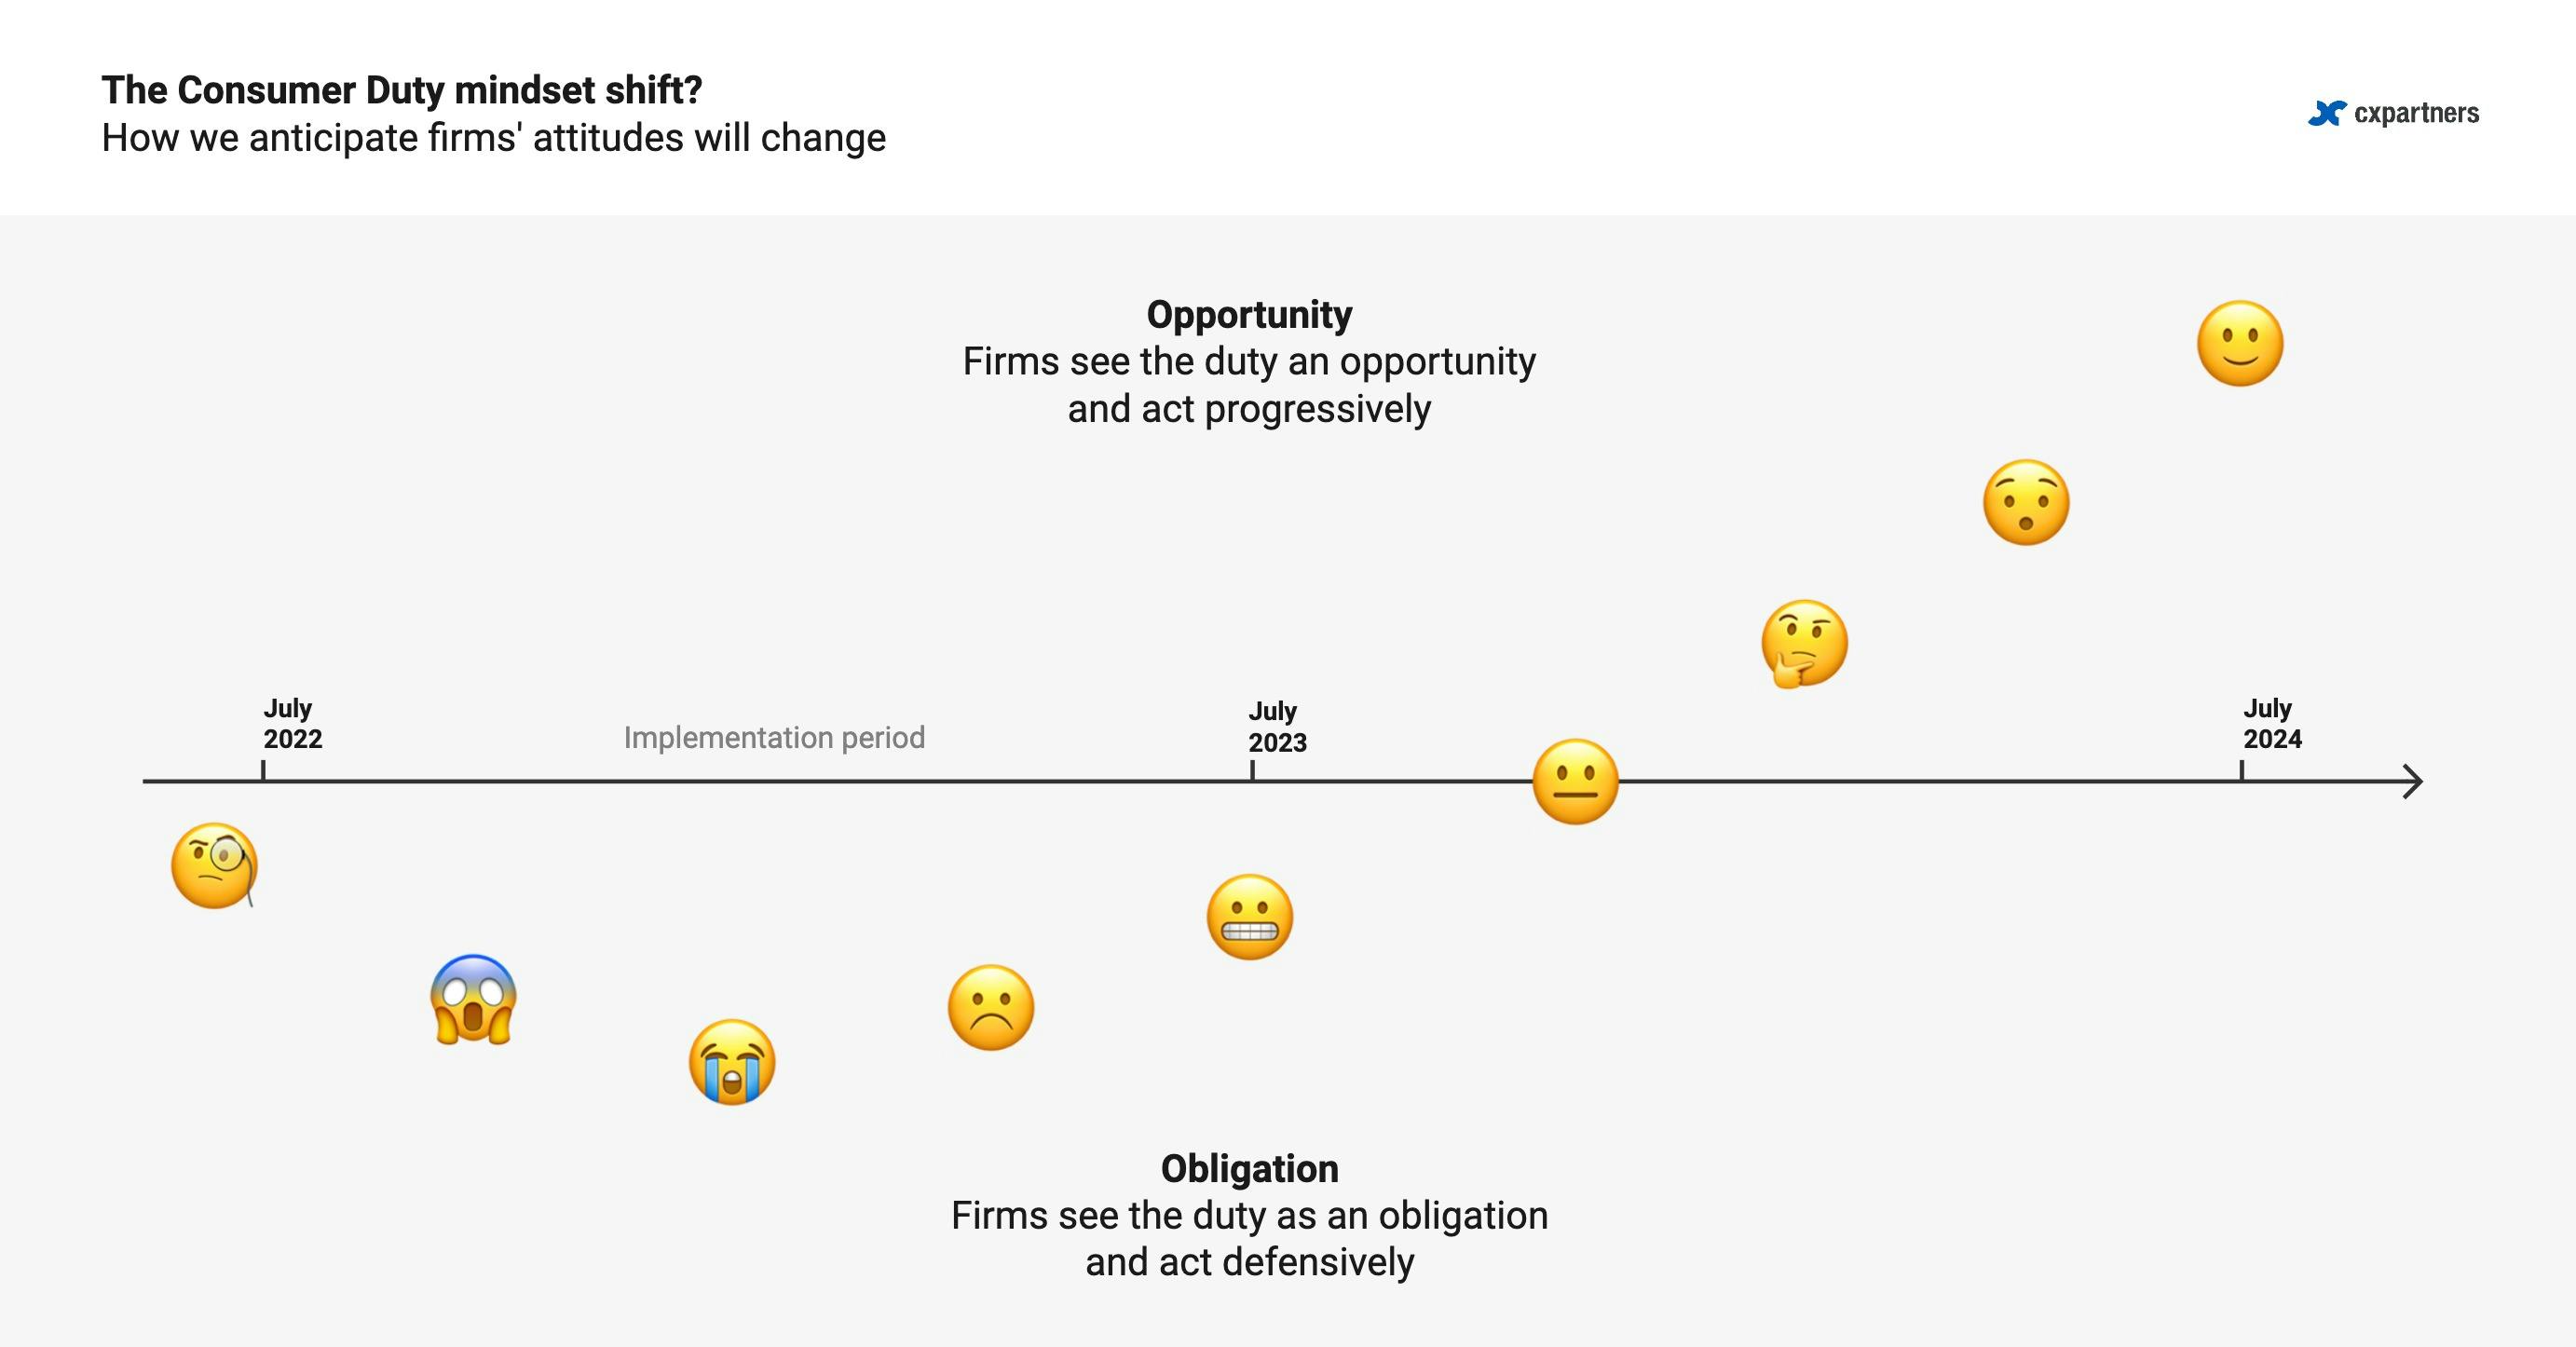 The Consumer Duty mindset shift - How we anticipate firms attitudes will change. Graph showing emojis as confused, sad and worried when seeing the duty as an obligation, and curious and happy when seeing the duty as an opportunity.